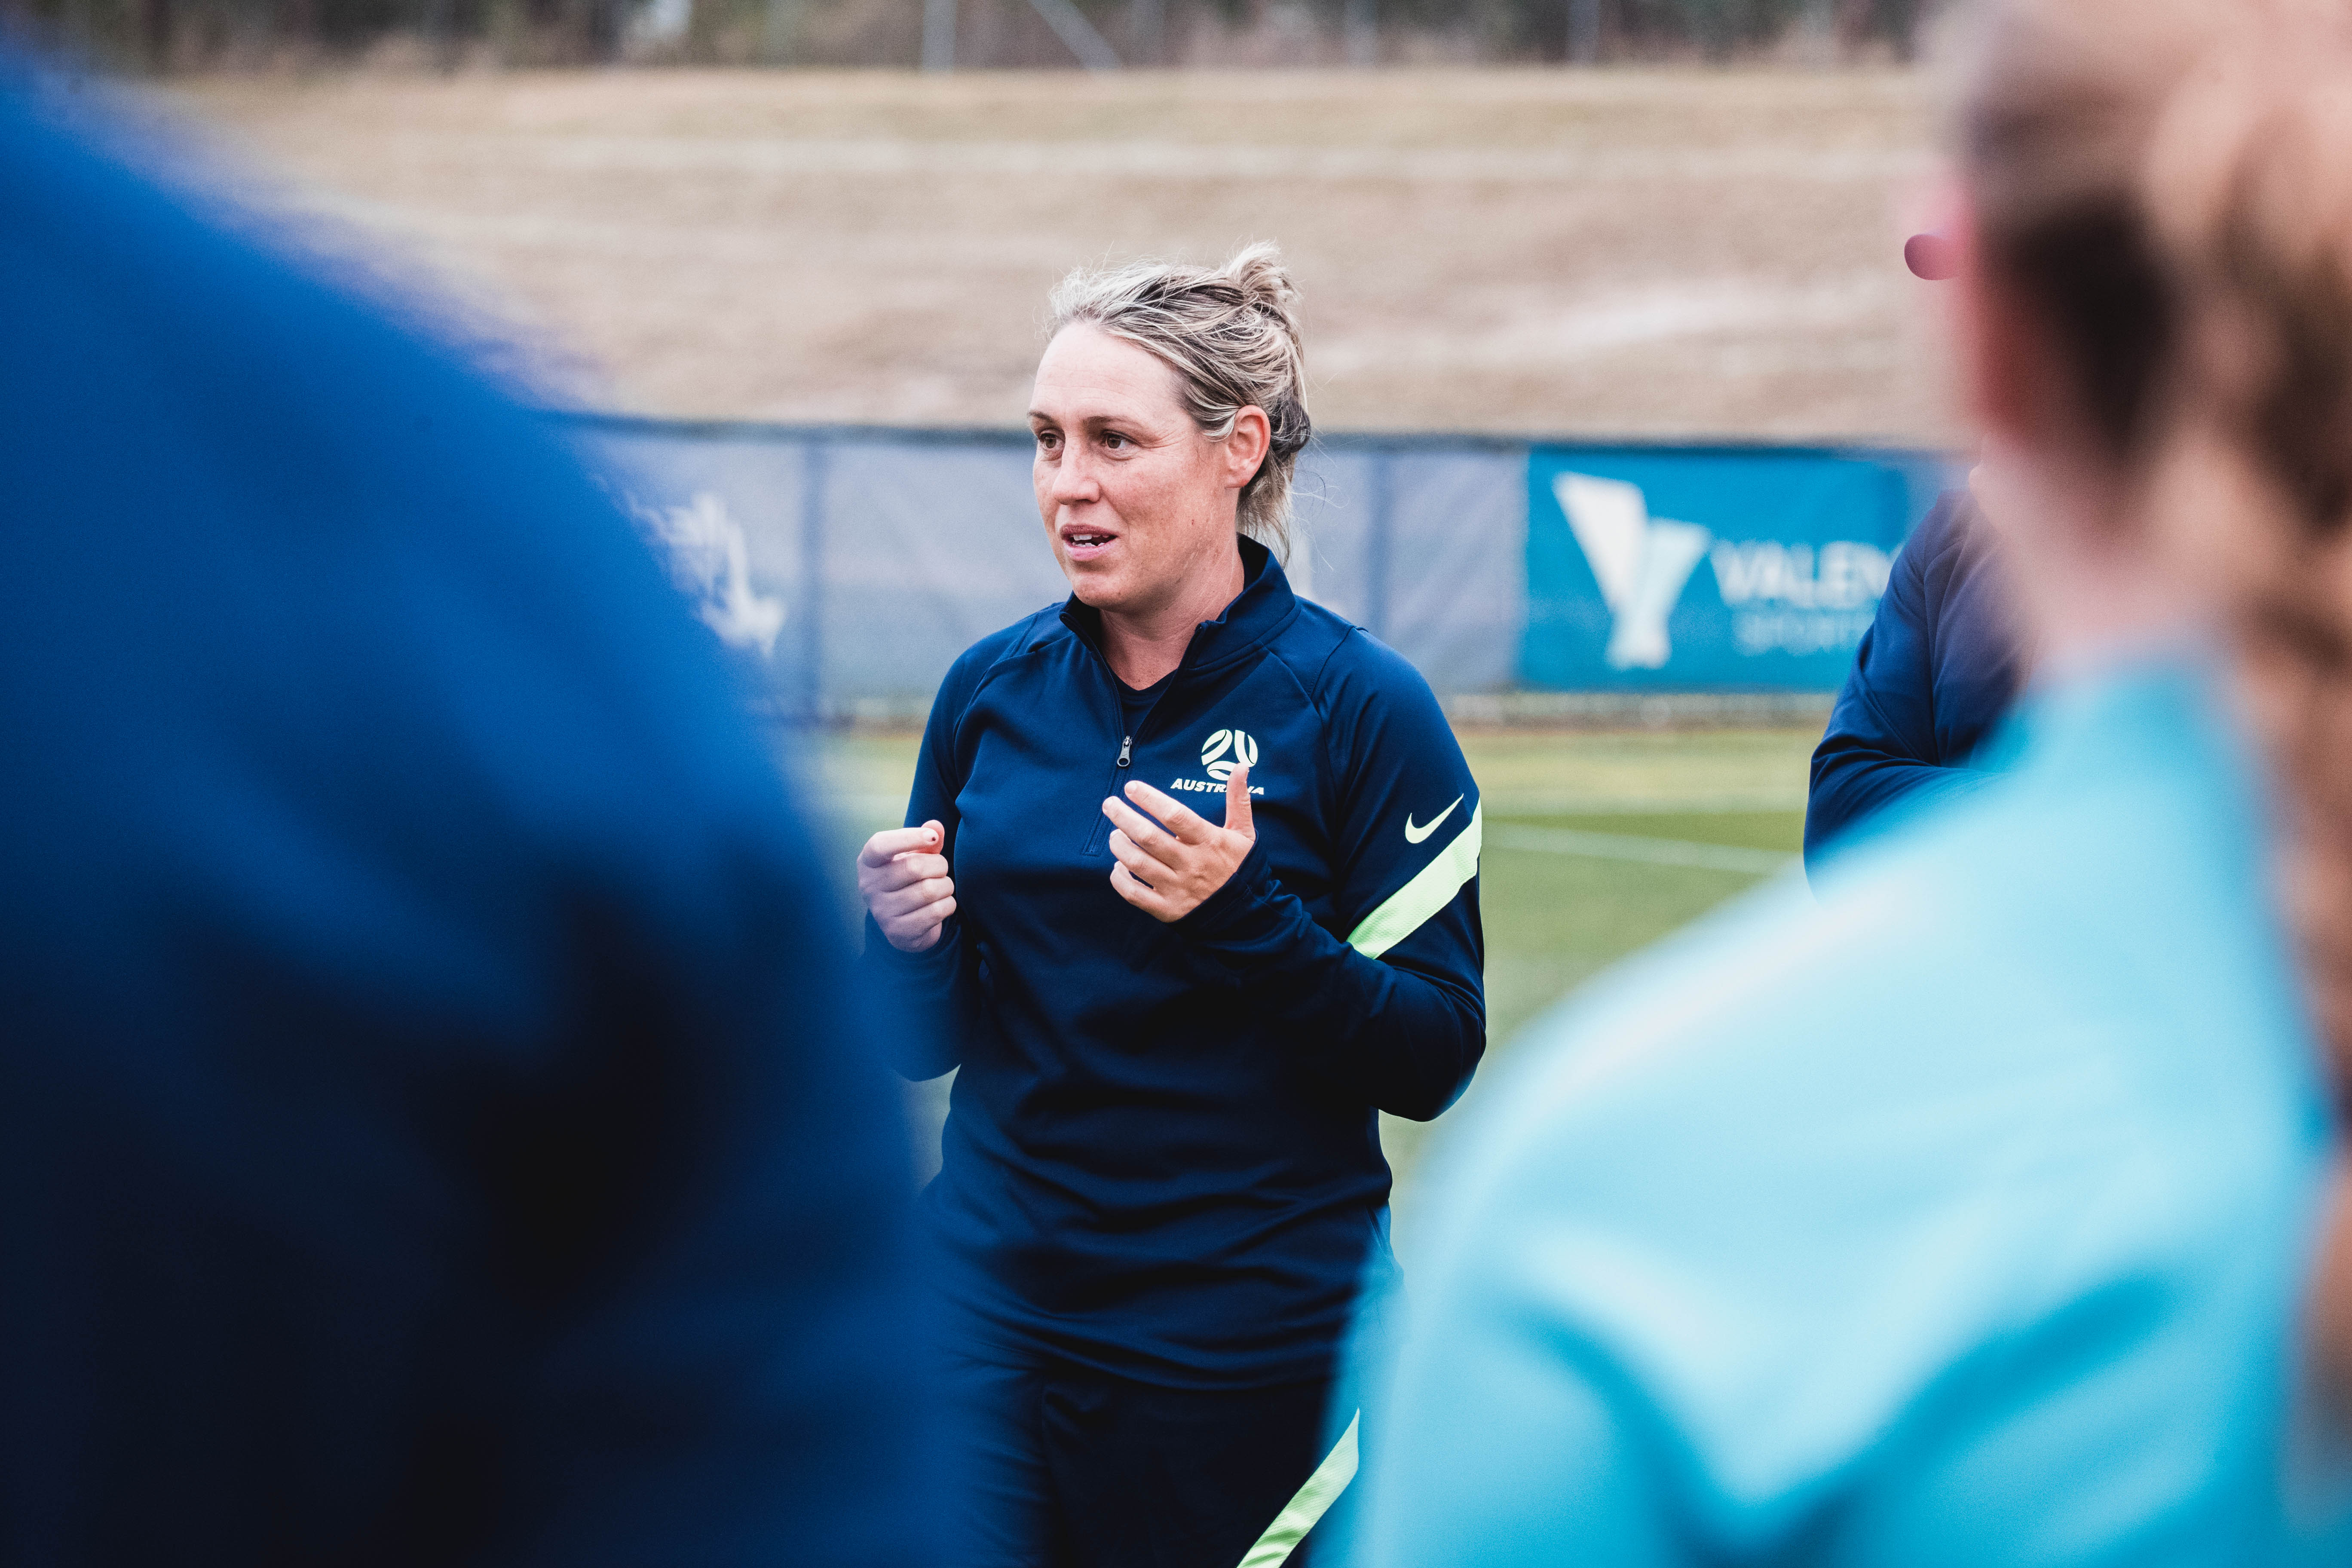 Head coach Leah Blayney, was a player the last time Australia competed at the FIFA U-20 Women's World Cup in 2006. Blayney will coach the side's return to to the tounament.